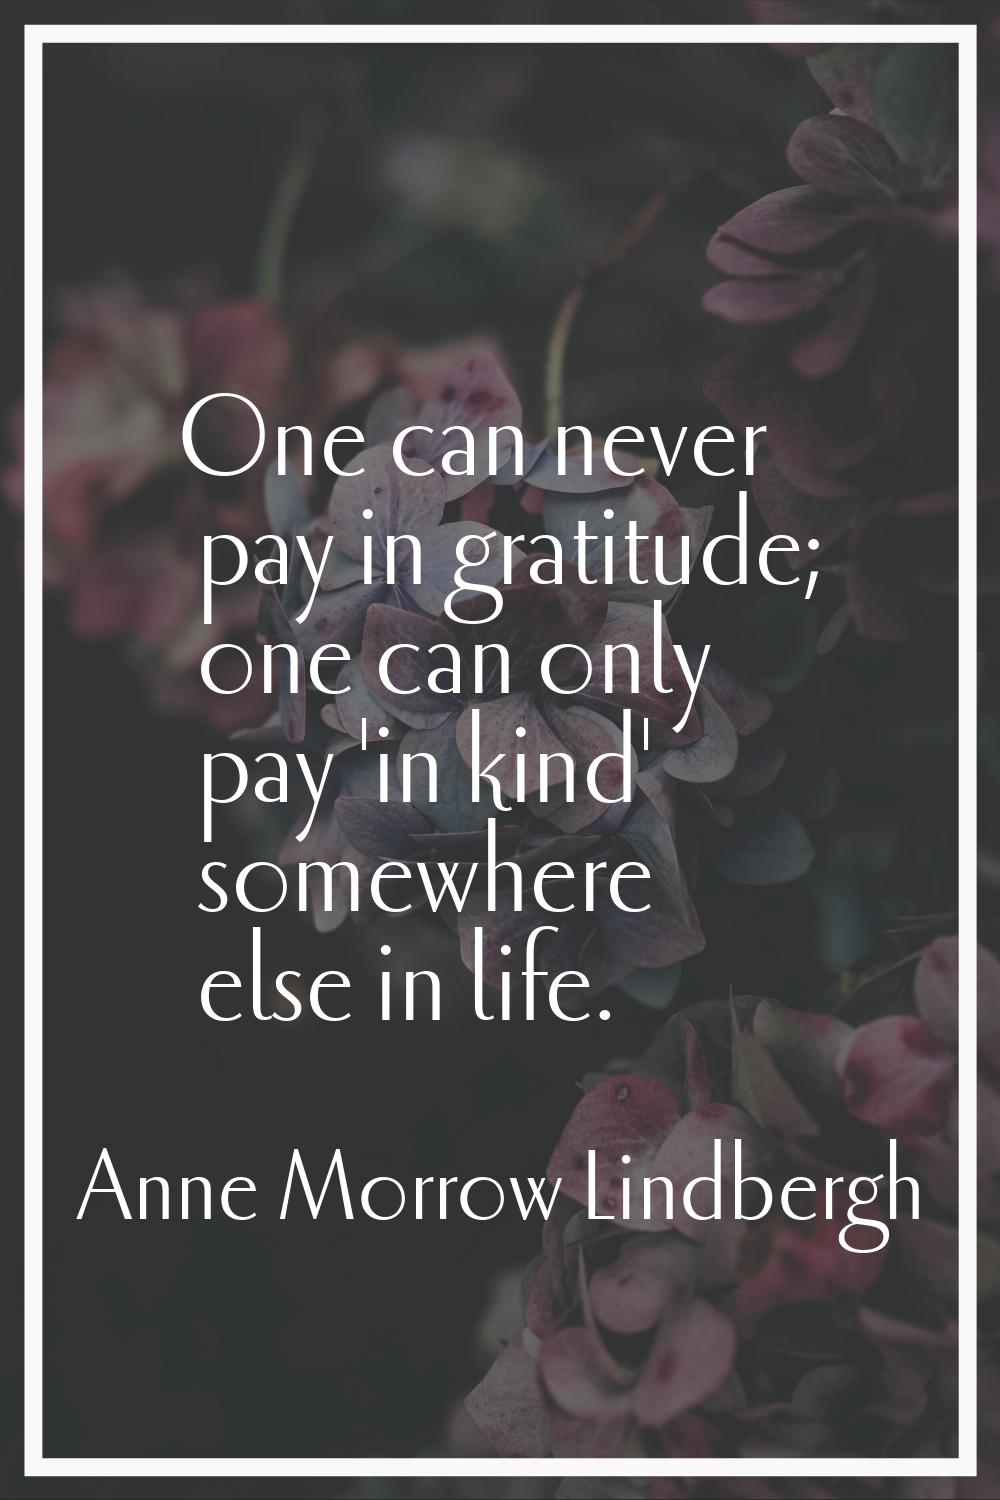 One can never pay in gratitude; one can only pay 'in kind' somewhere else in life.